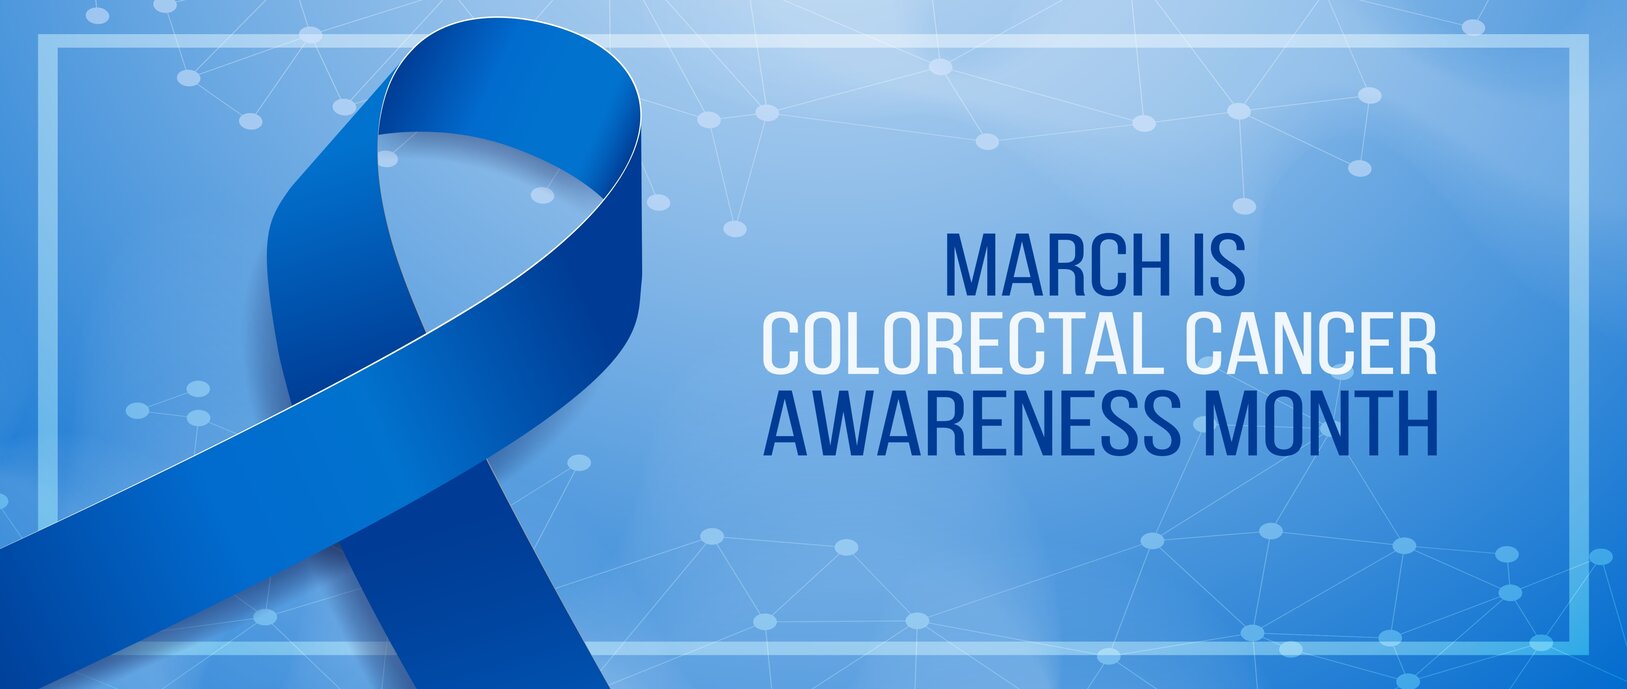 March is colorectal cancer awareness